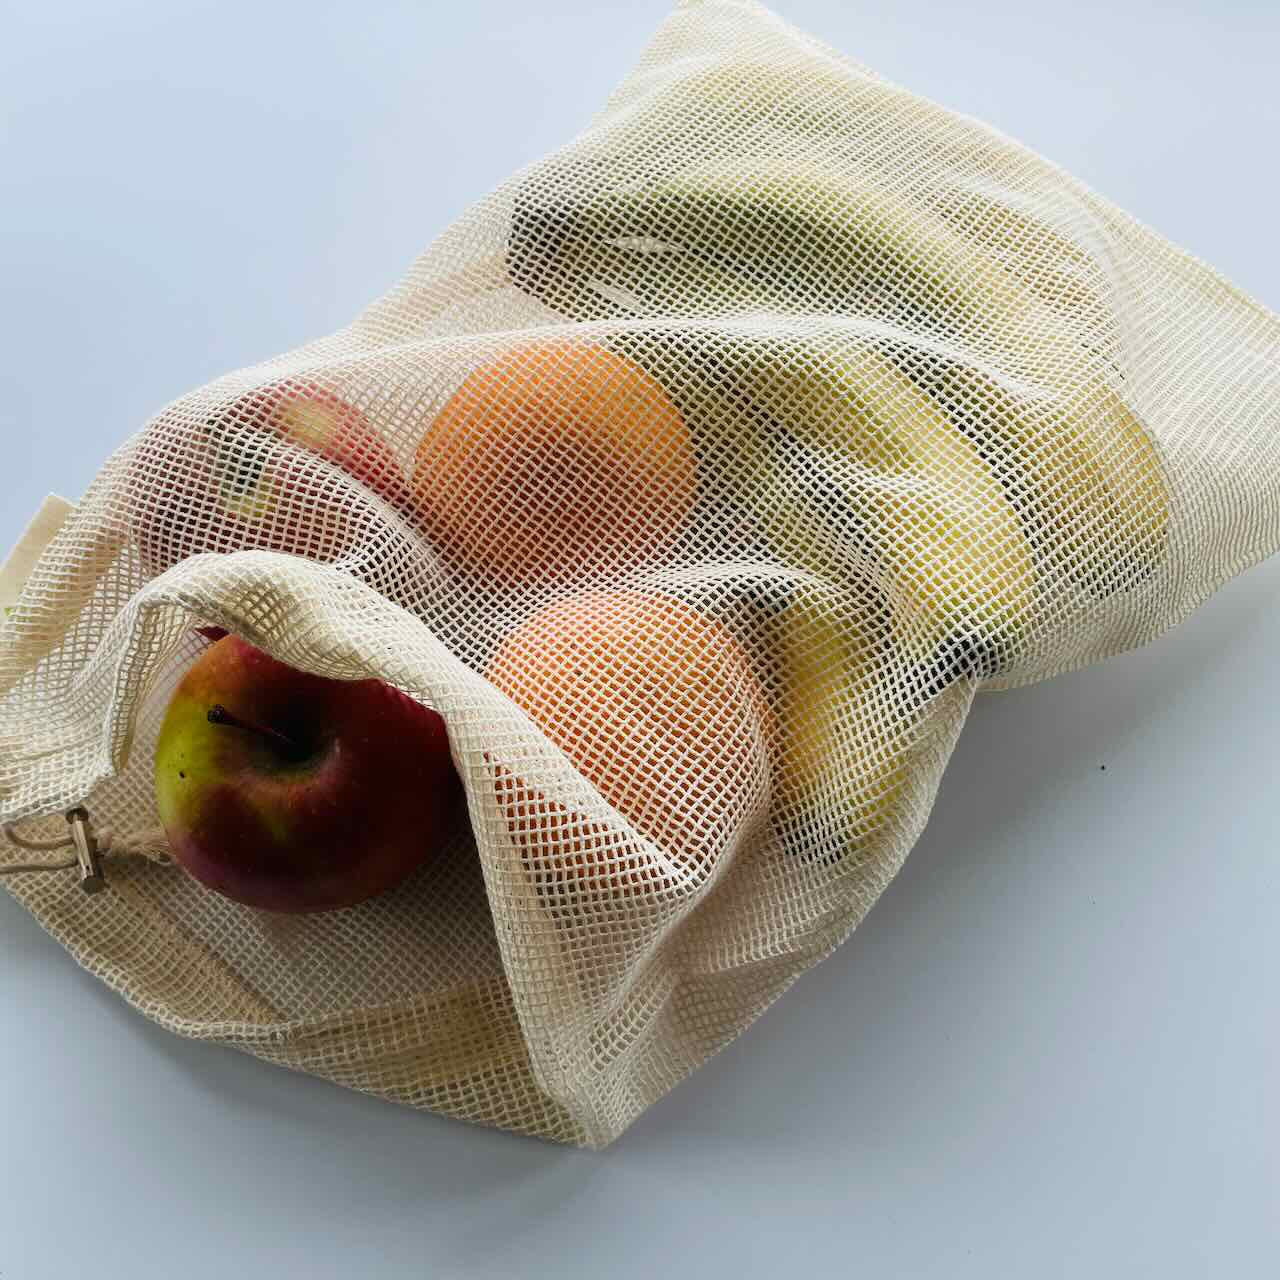 a large mesh bag containing bananas, oranges and apples